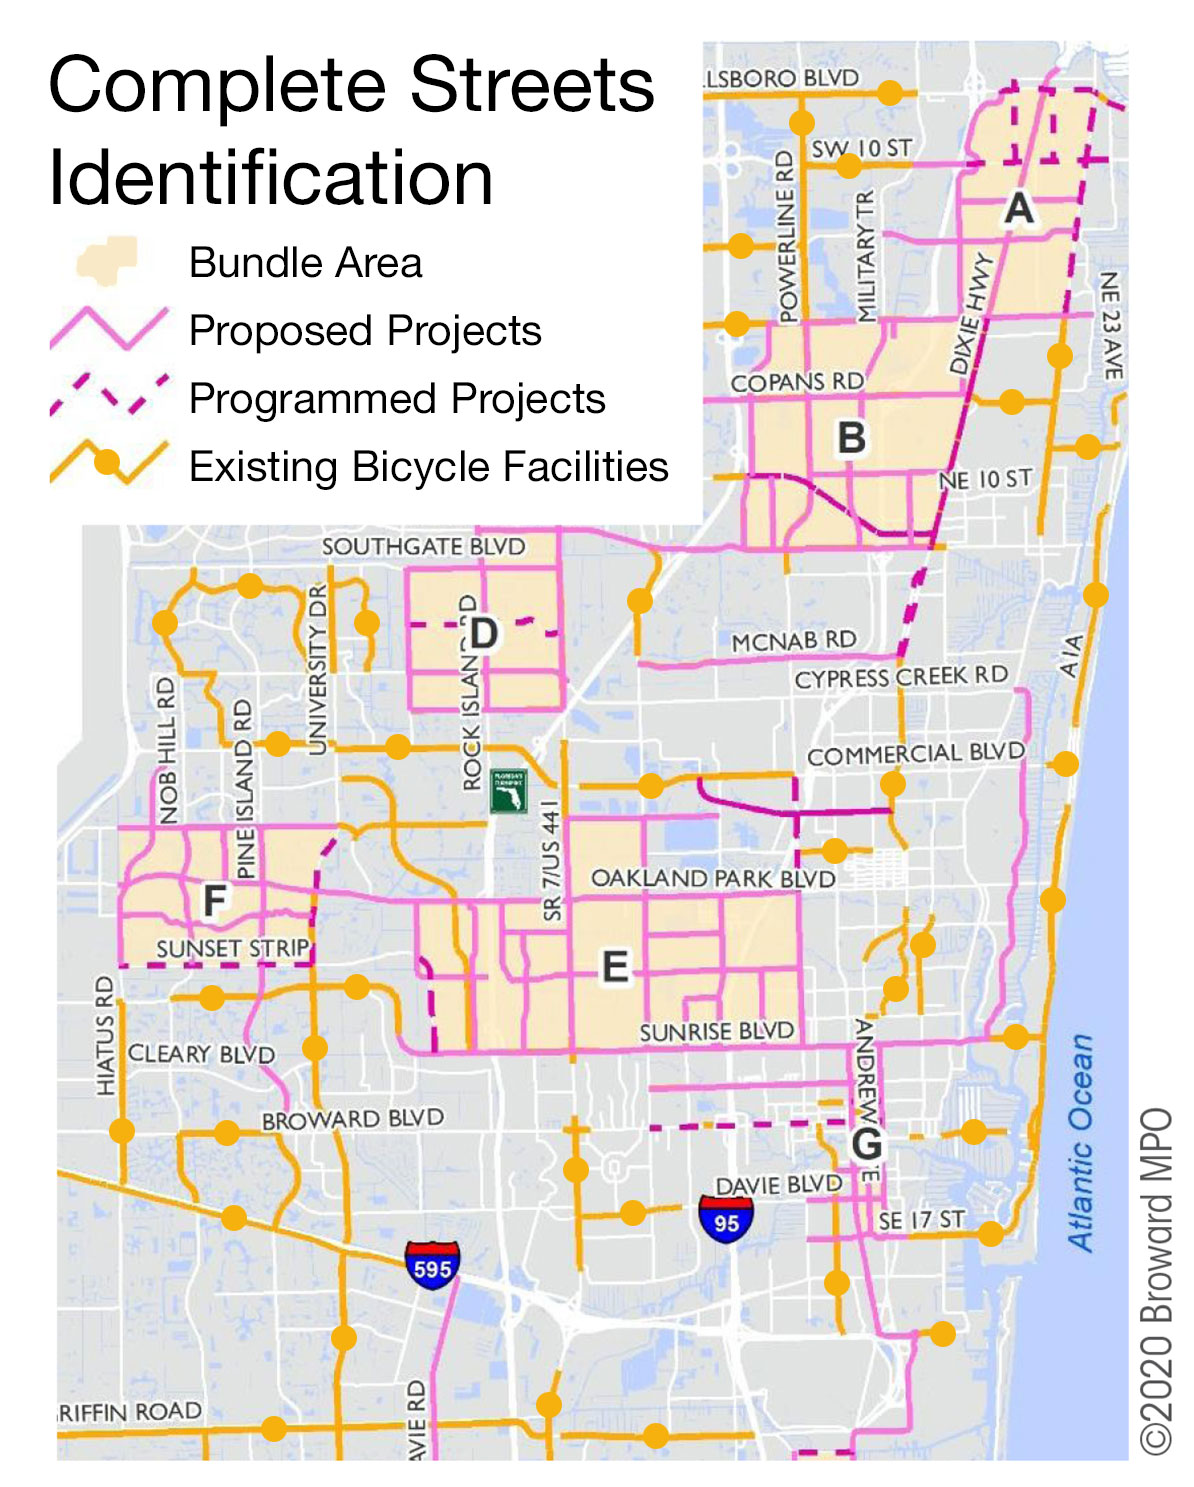 Excerpt from Broward MPO Complete Streets Master Plan, showing locations of proposed and programmed projects, bundle areas, and existing bicycle facilities.